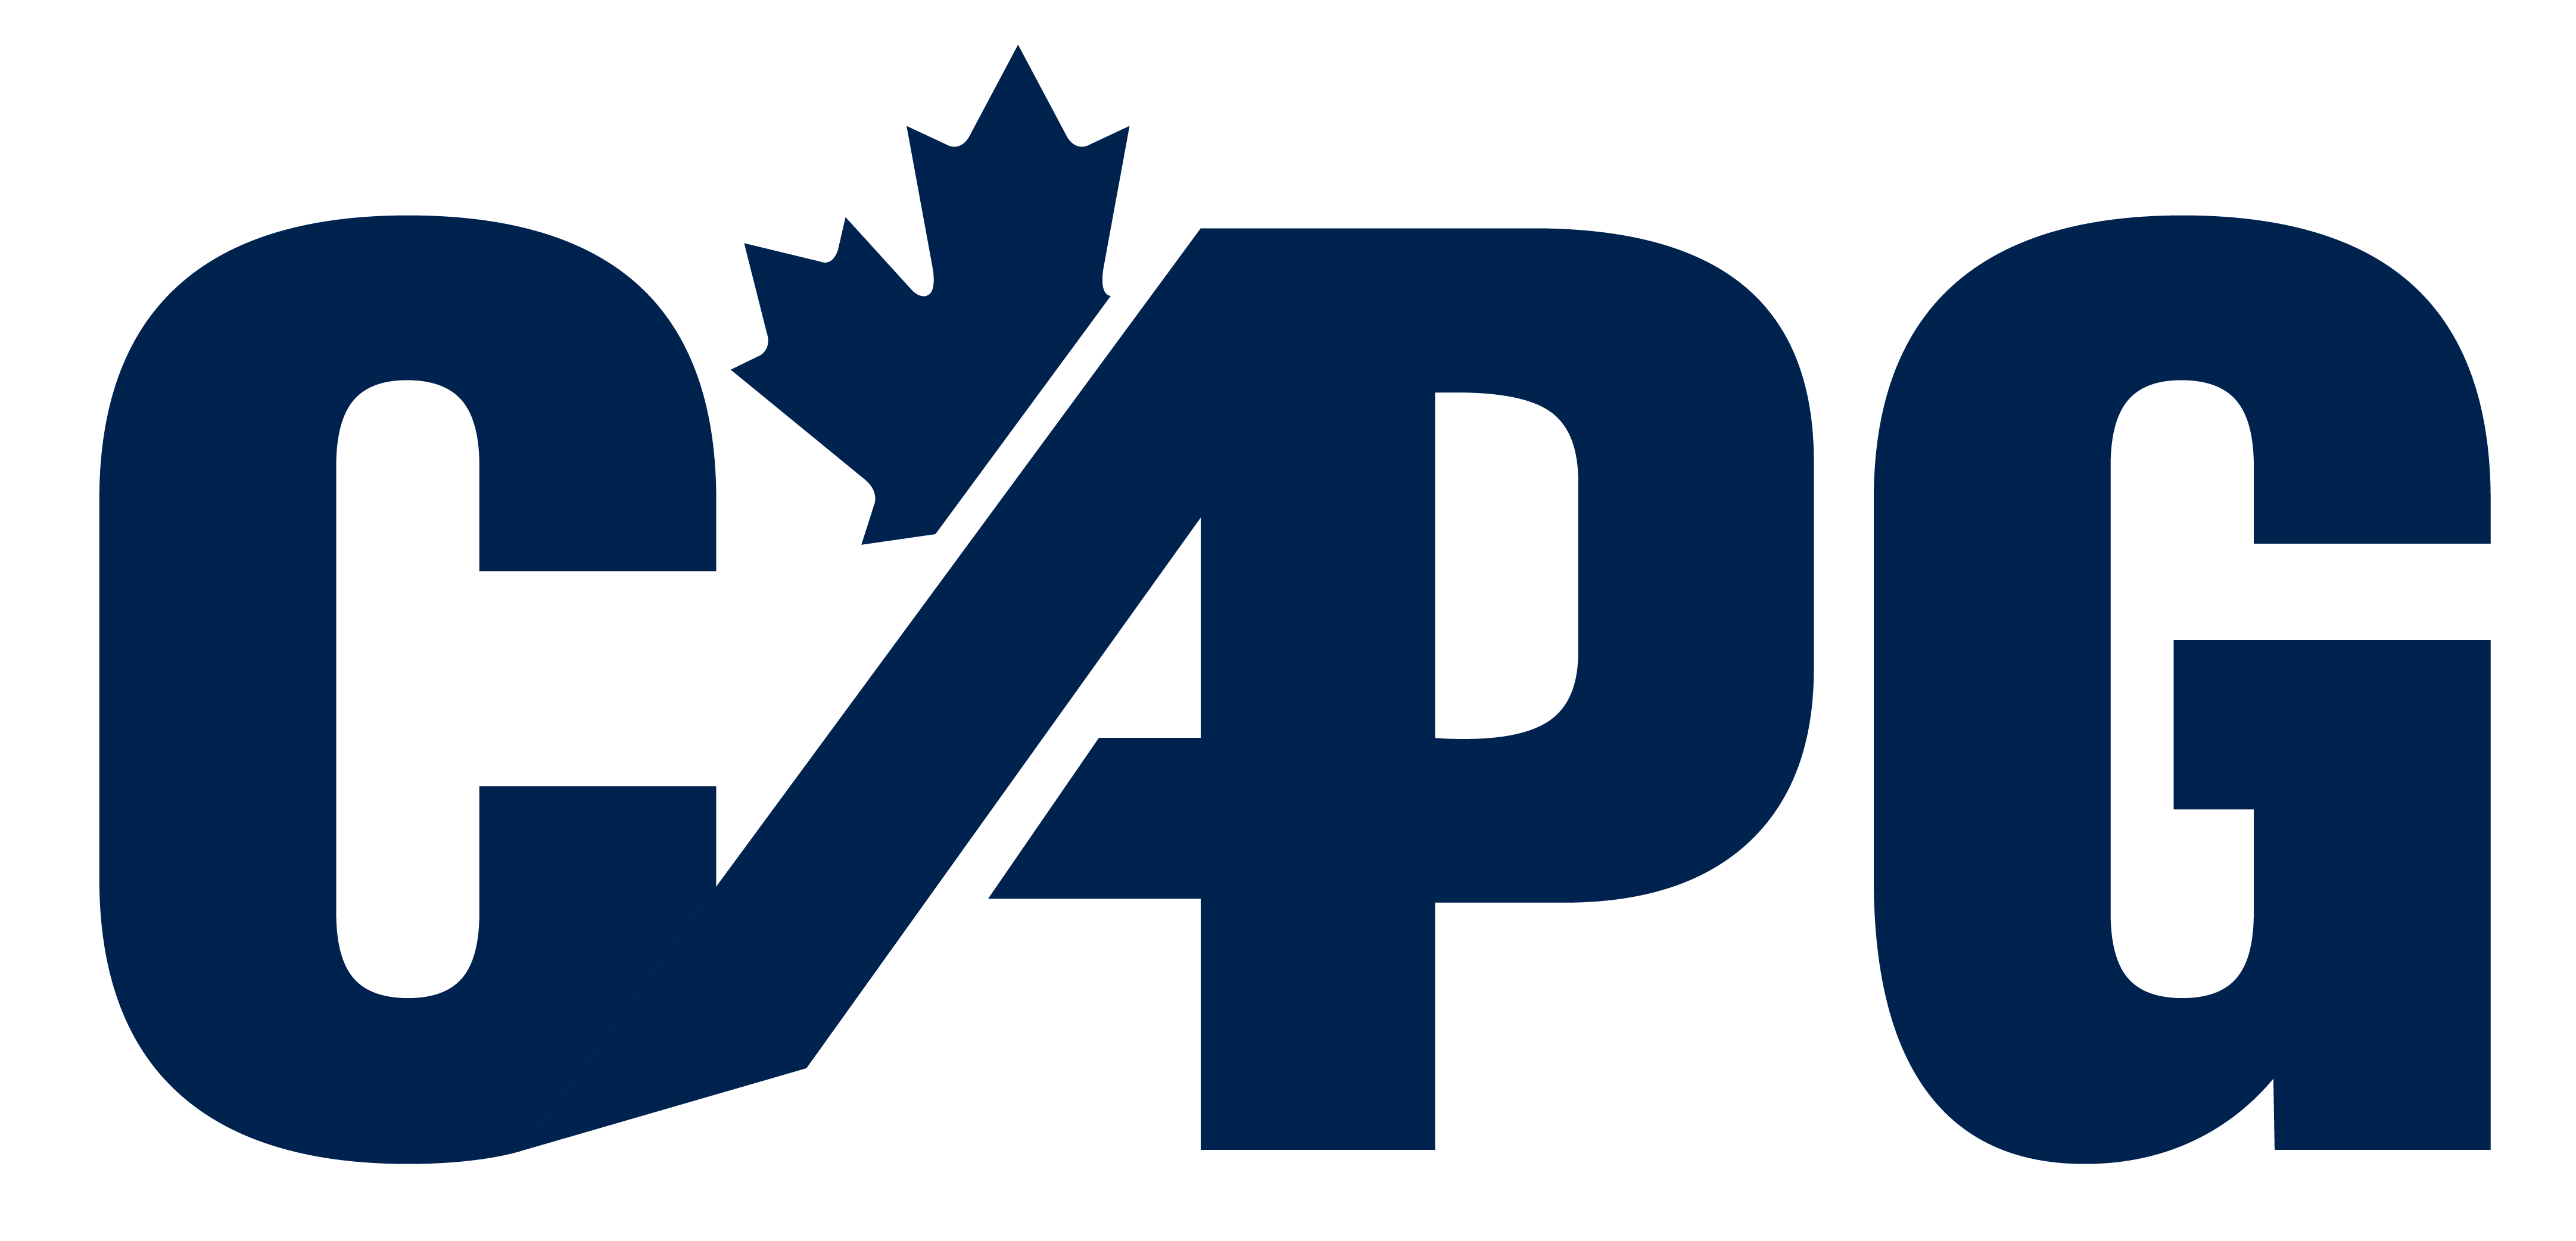 CAPG Conference 2021 - September 28th-30th